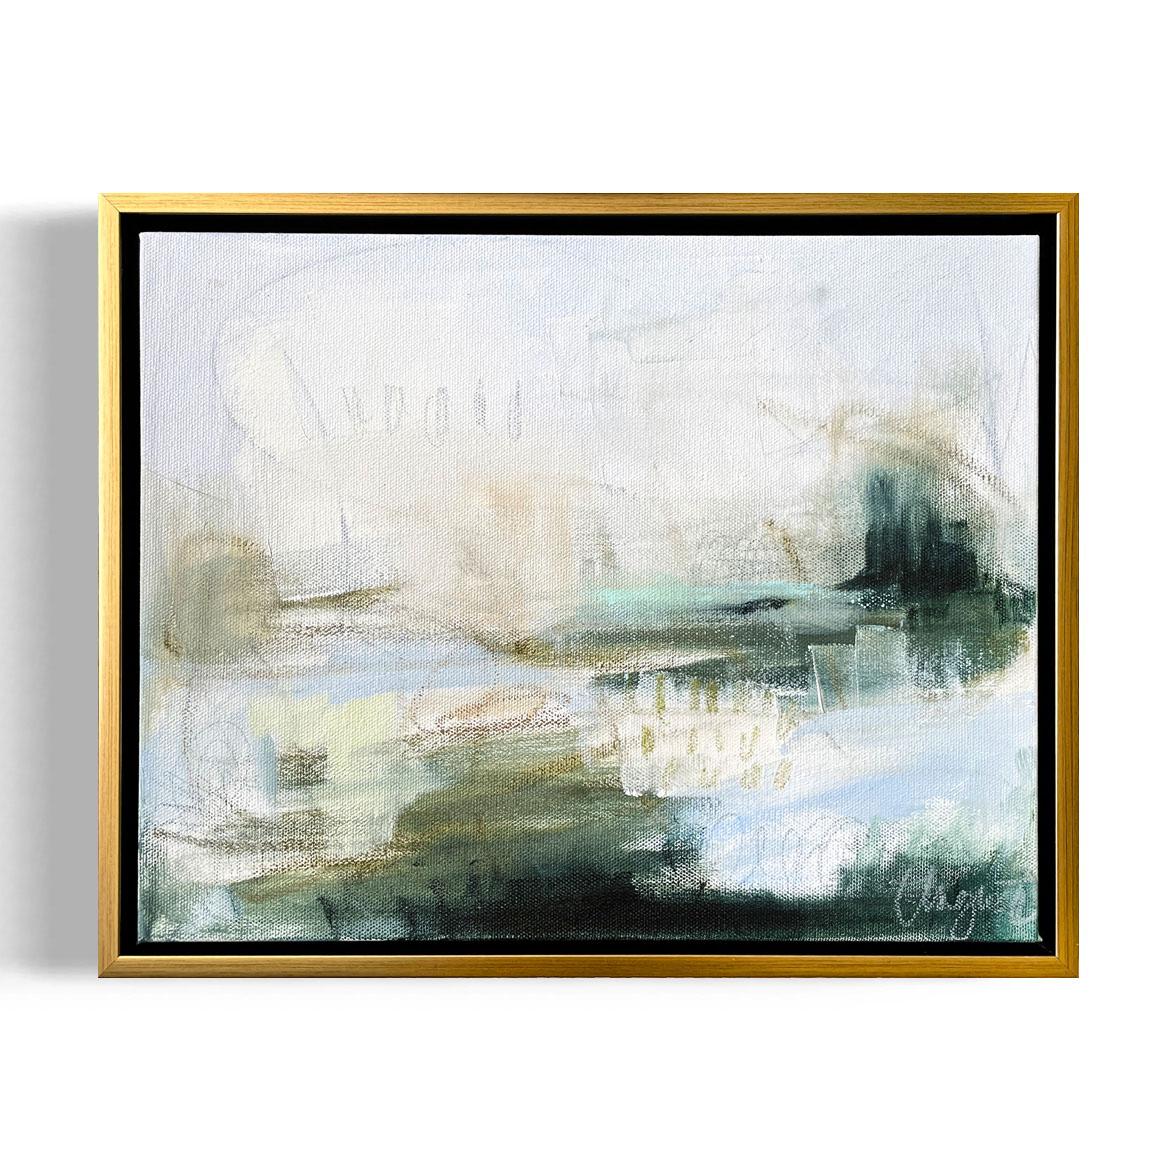 Augusta Wilson Landscape Painting - "Lake No. 5", framed abstract oil painting on canvas